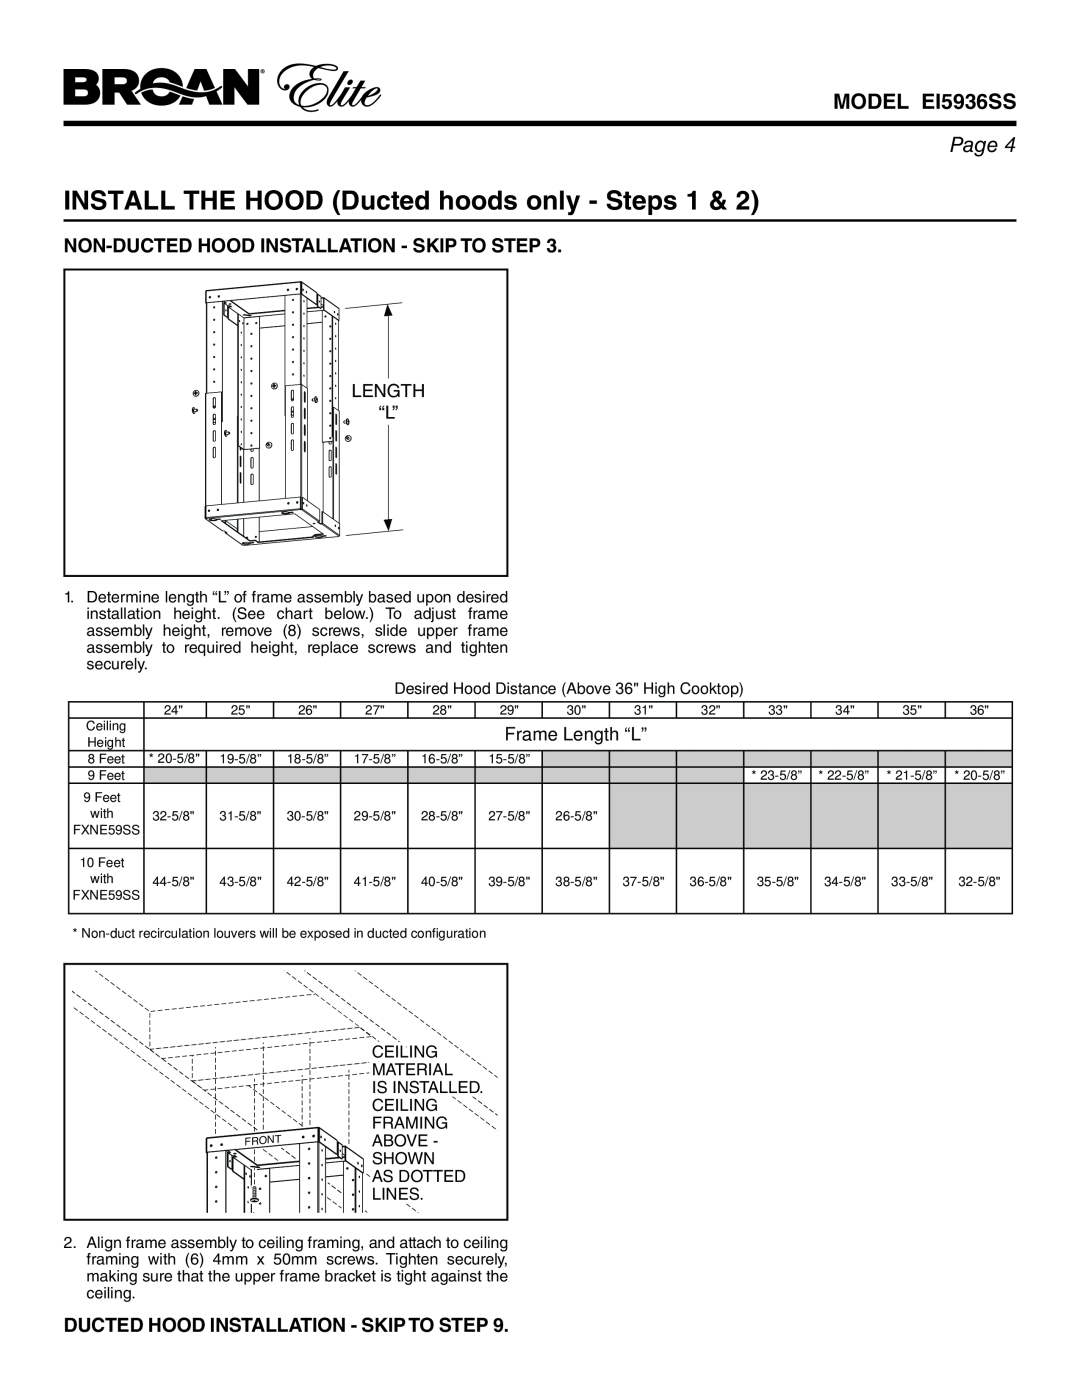 Broan EI5936SS INSTALL THE HOOD Ducted hoods only - Steps 1, Non-Ducted Hood Installation - Skip To Step, Length, Ceiling 